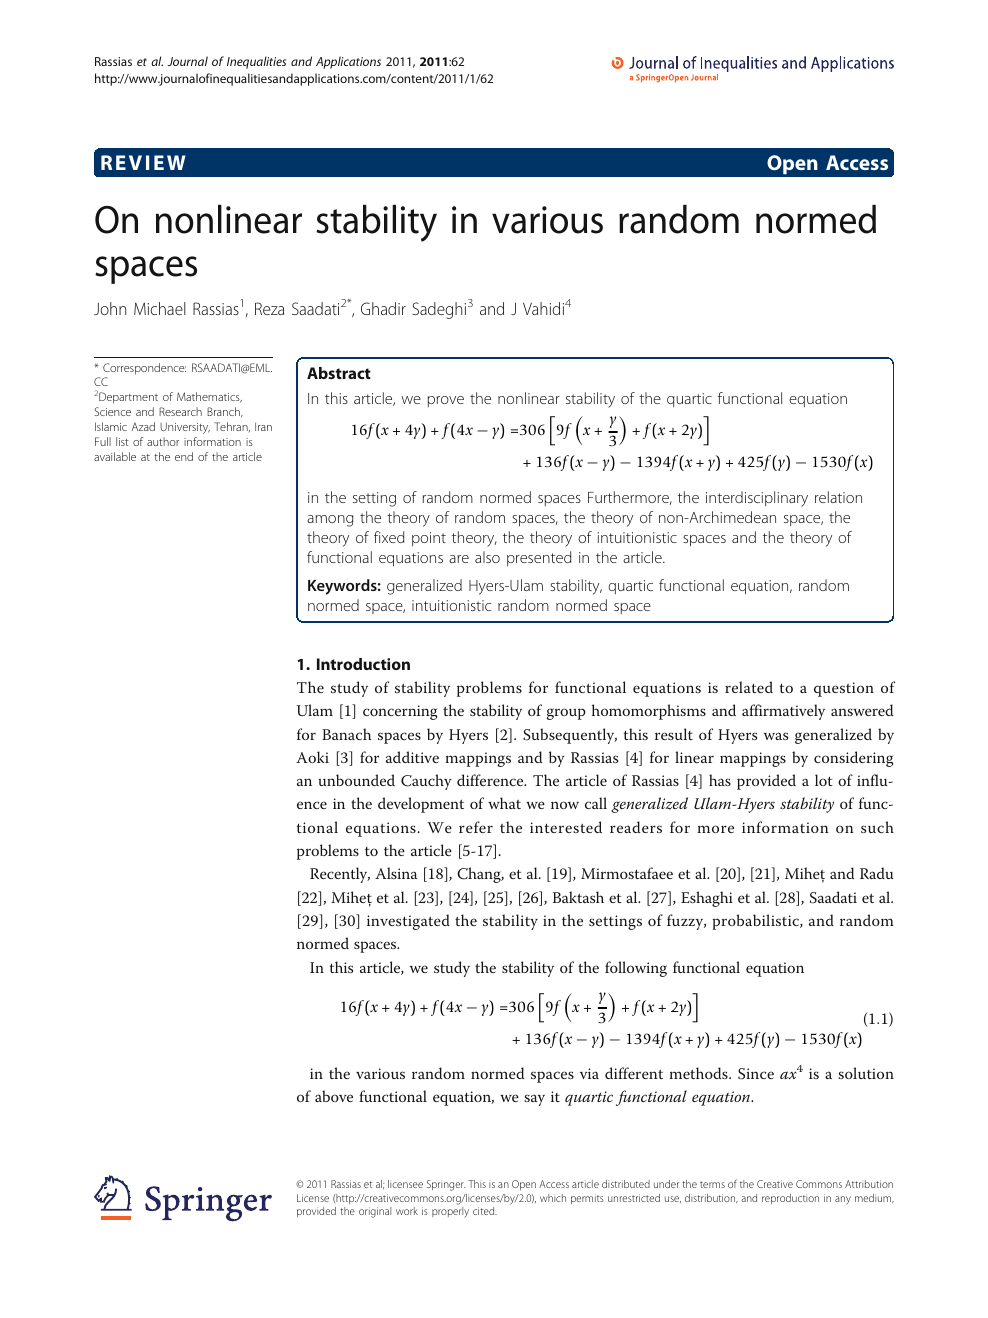 On Nonlinear Stability In Various Random Normed Spaces Topic Of Research Paper In Mathematics Download Scholarly Article Pdf And Read For Free On Cyberleninka Open Science Hub